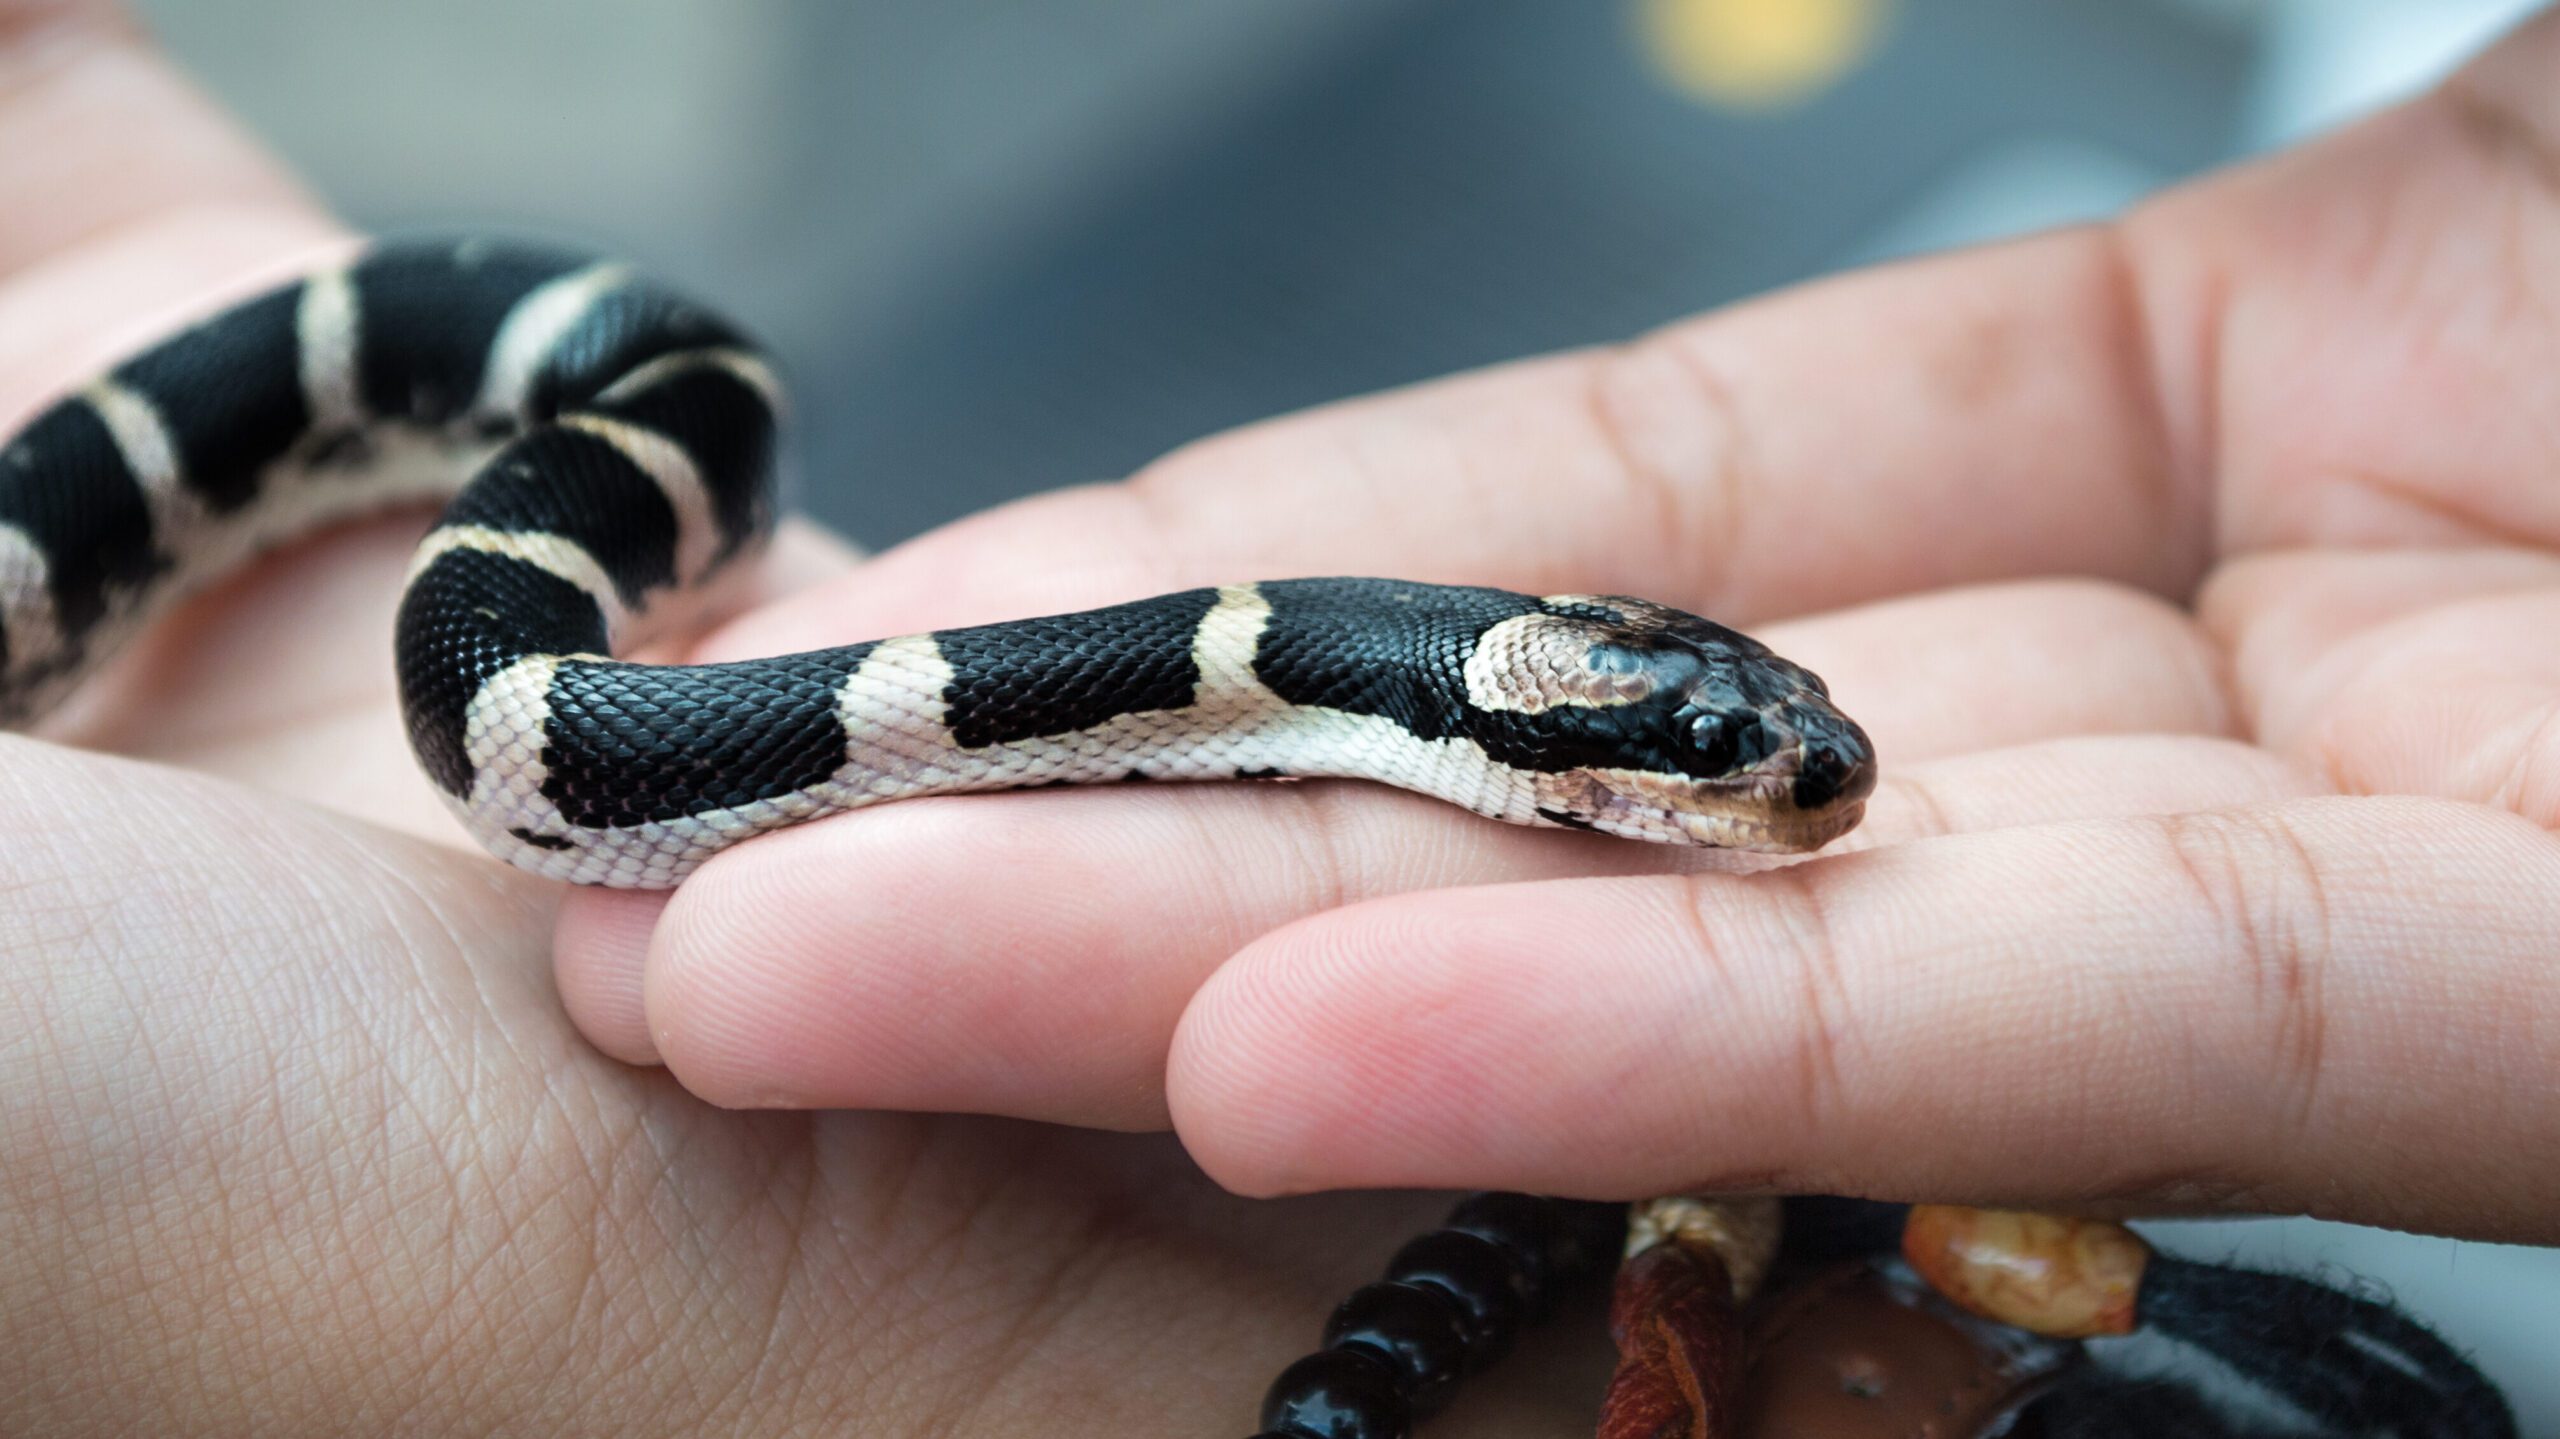 Snakes can often be good pets, but there are things to consider before you bring one home